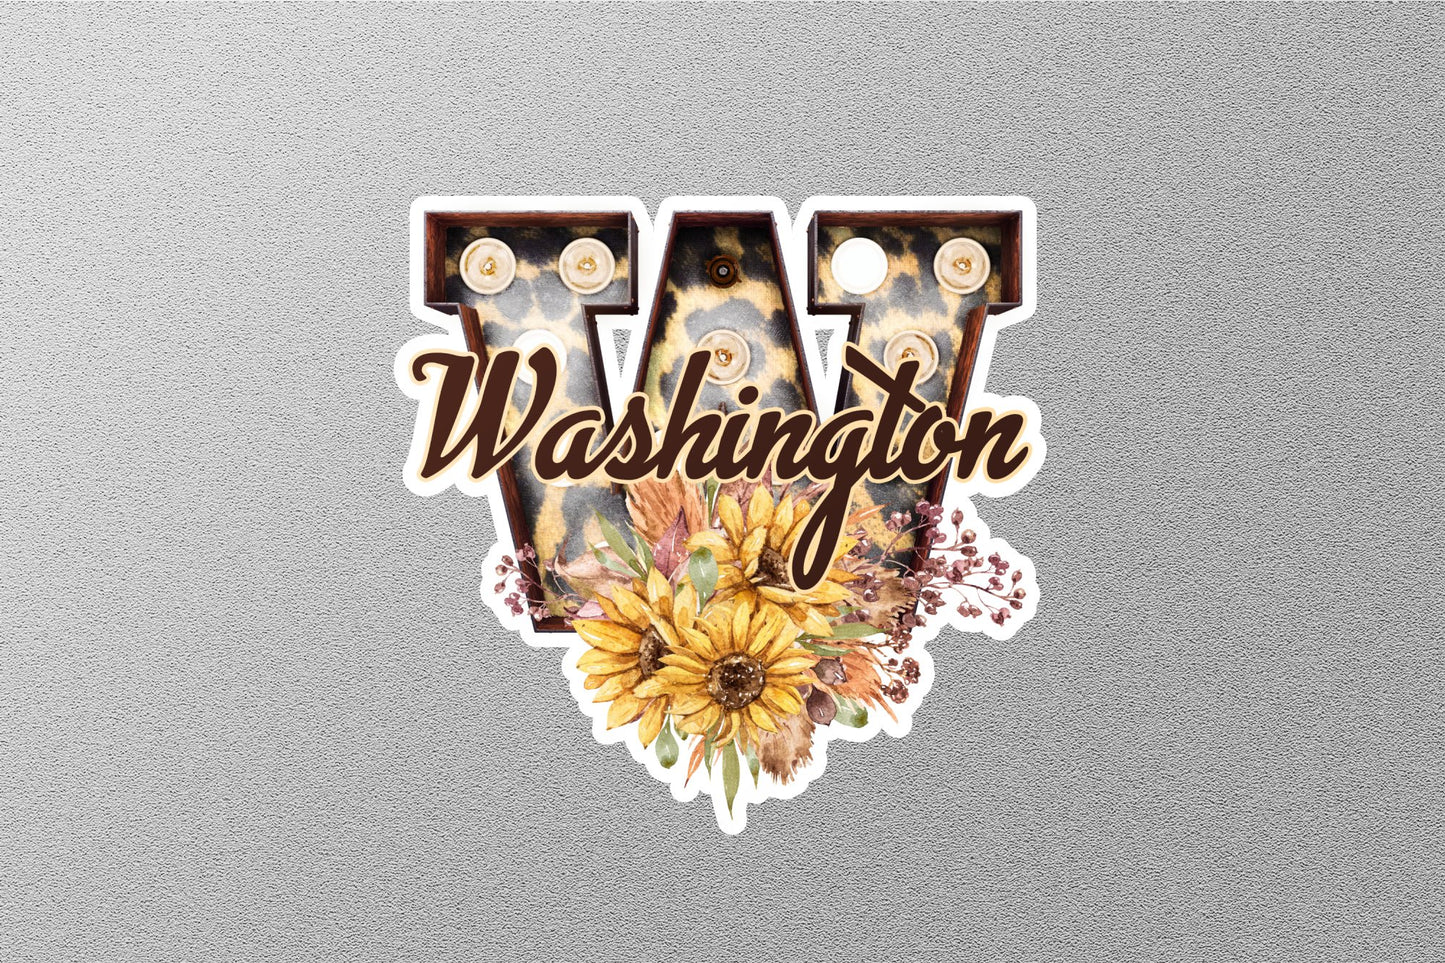 Floral W Washington With Sunflowers State Sticker